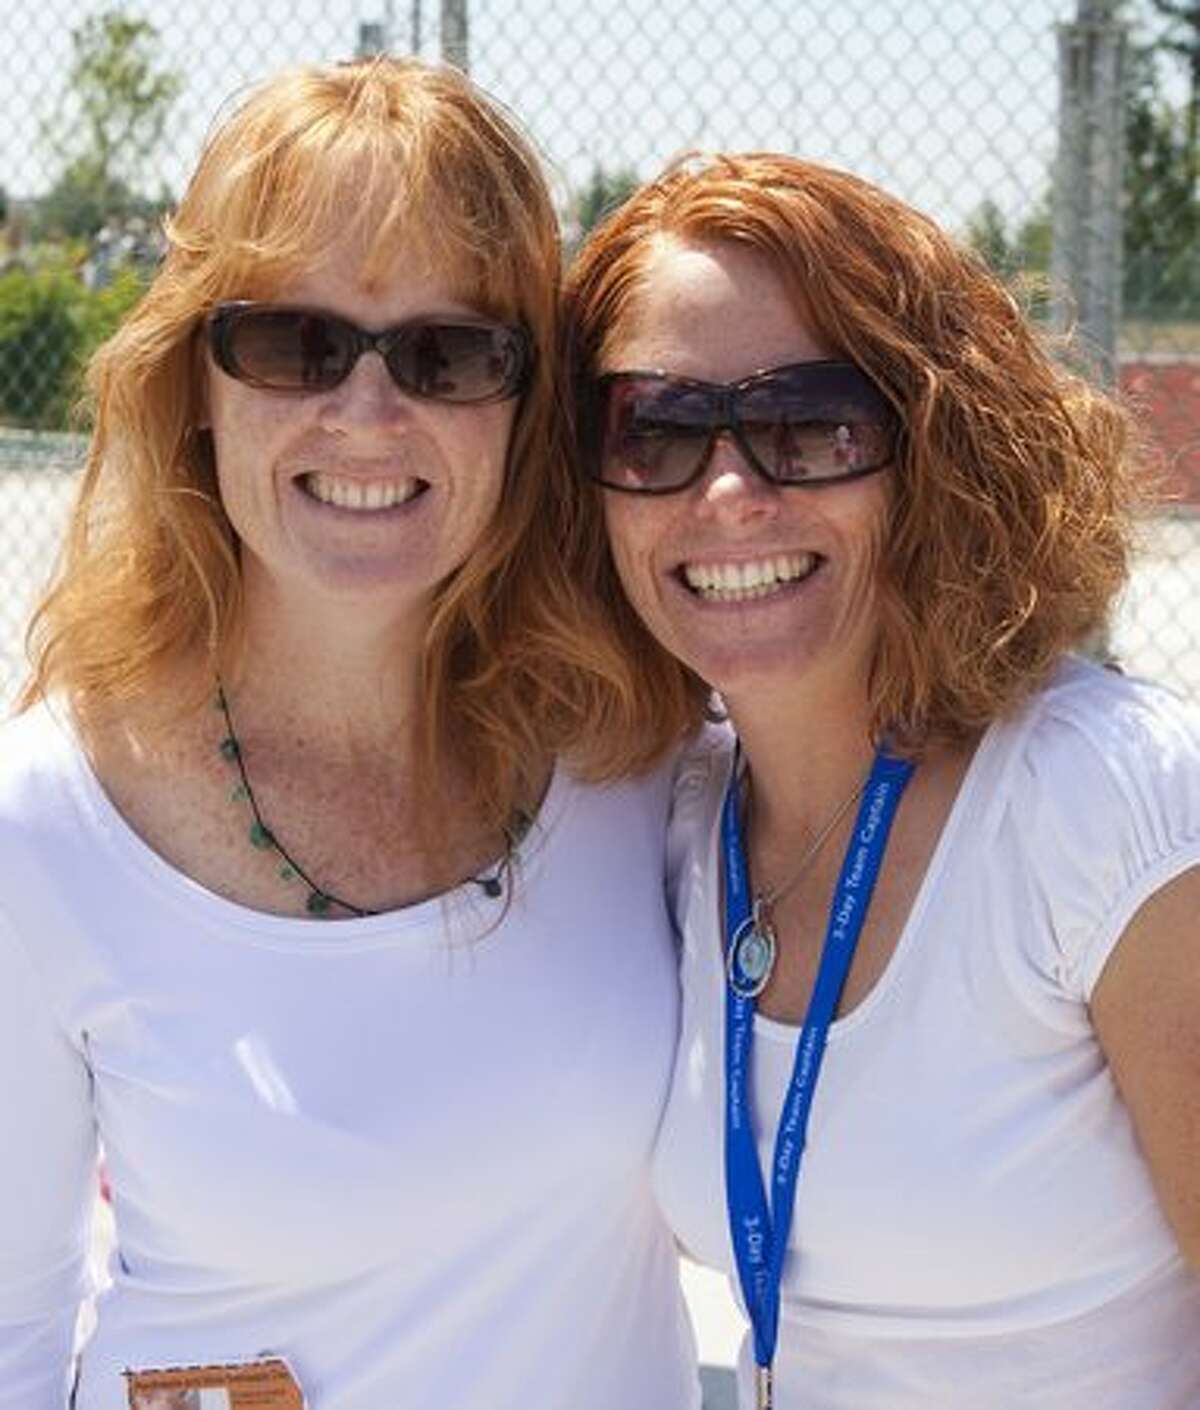 Kathy Kinard, left, and Angela Huber helped break the Guinness World Record for the largest gathering of natural redheads at Redheads and More Redheads Day in Sammamish.